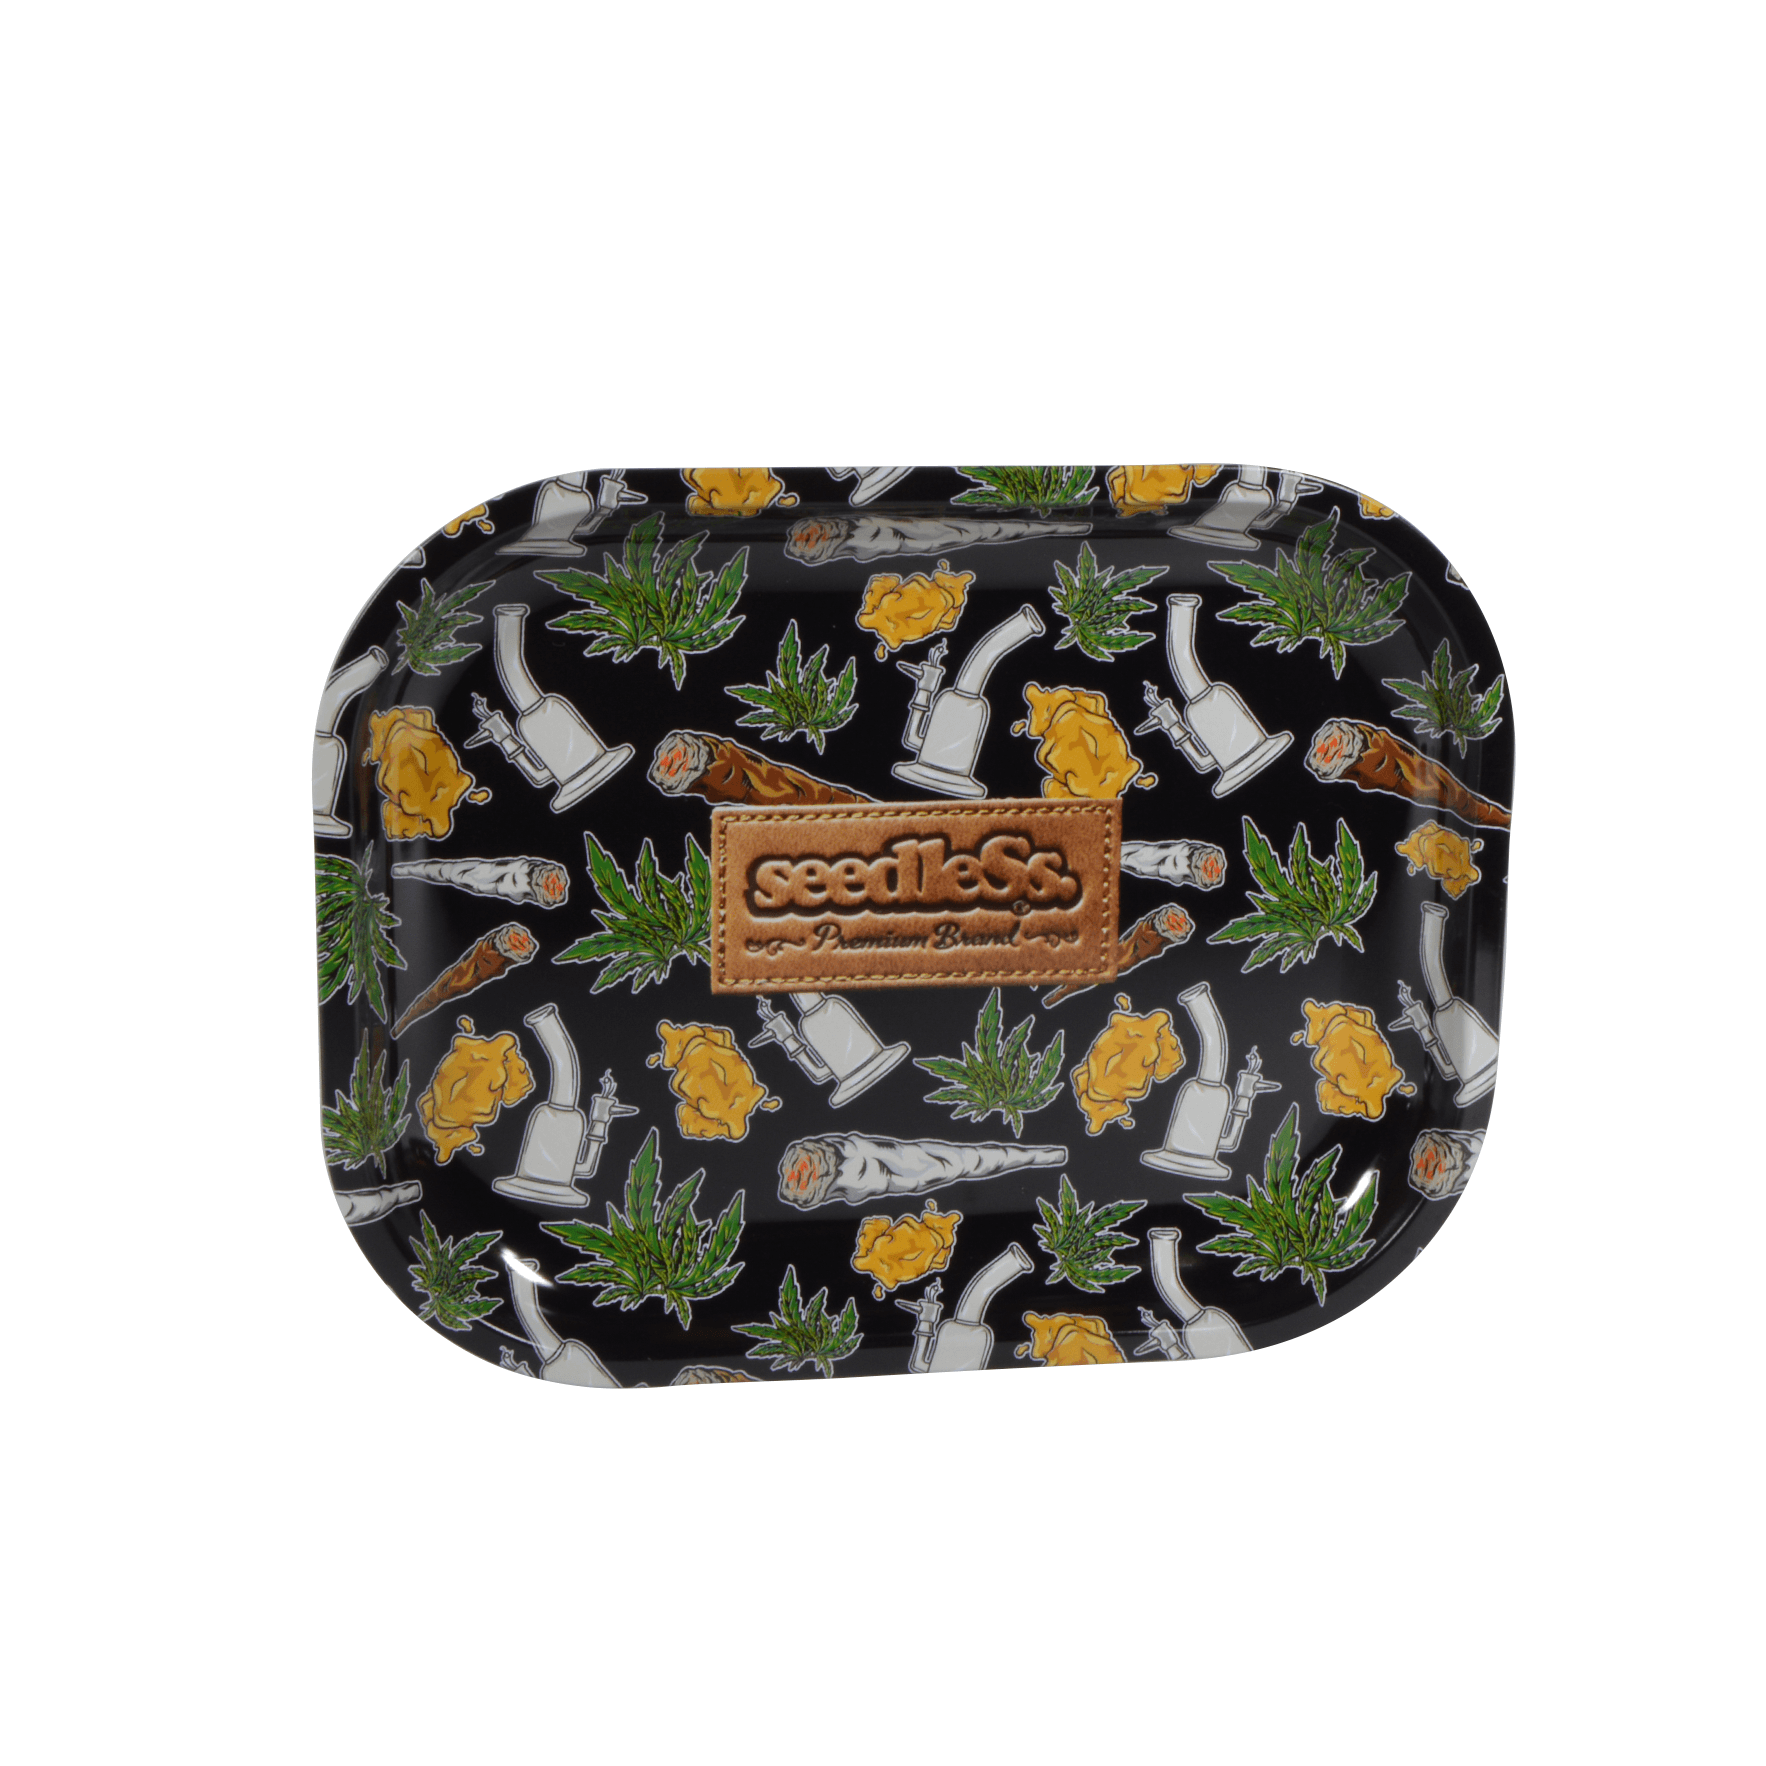 Seedless Essentials Metal Rolling Tray - Small - 1